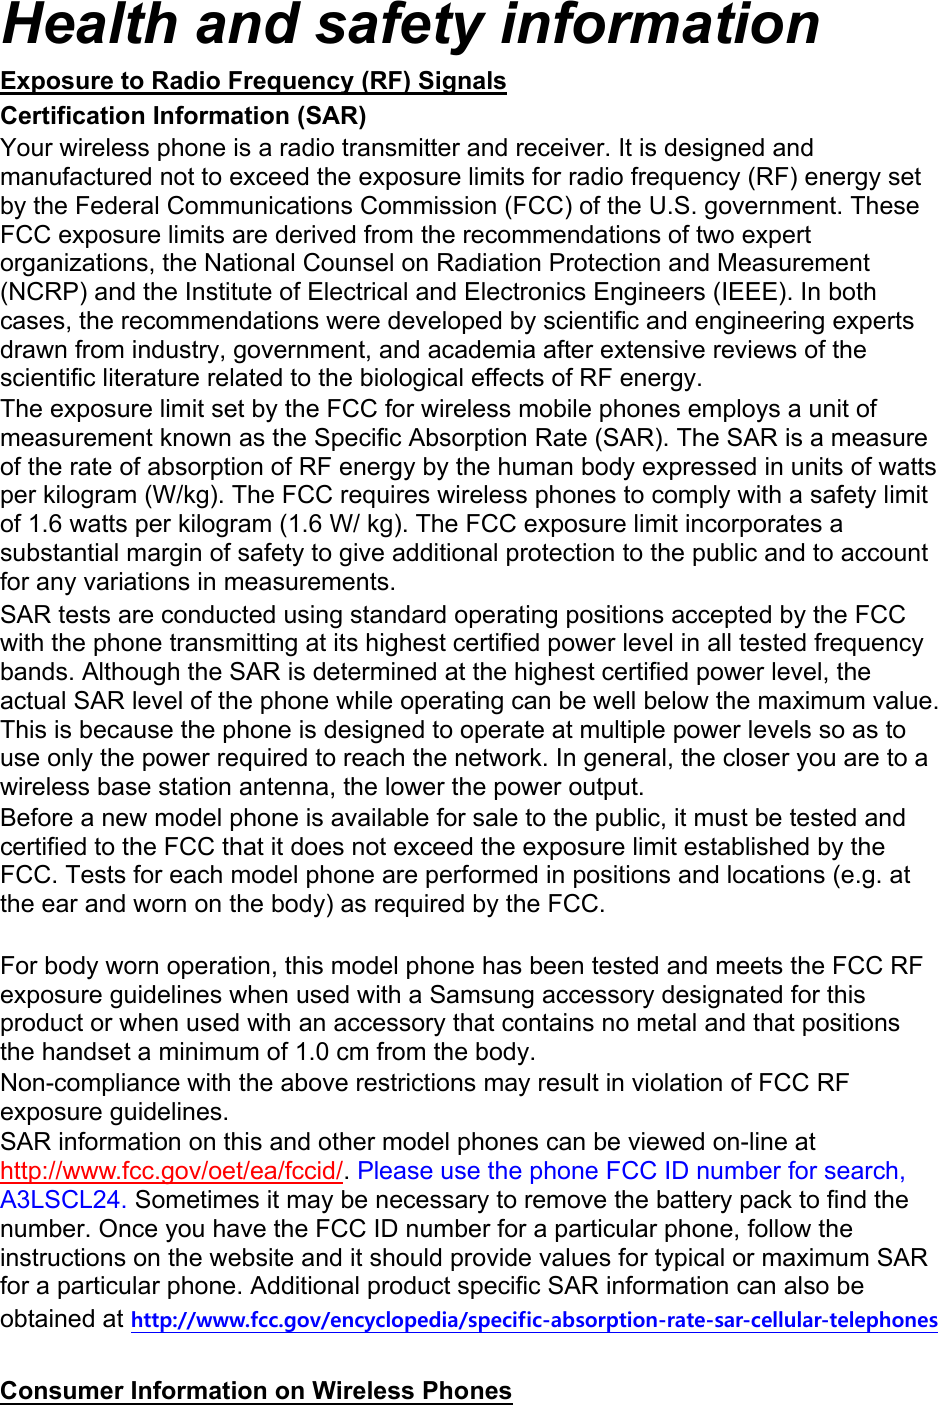 Health and safety information Exposure to Radio Frequency (RF) Signals Certification Information (SAR) Your wireless phone is a radio transmitter and receiver. It is designed and manufactured not to exceed the exposure limits for radio frequency (RF) energy set by the Federal Communications Commission (FCC) of the U.S. government. These FCC exposure limits are derived from the recommendations of two expert organizations, the National Counsel on Radiation Protection and Measurement (NCRP) and the Institute of Electrical and Electronics Engineers (IEEE). In both cases, the recommendations were developed by scientific and engineering experts drawn from industry, government, and academia after extensive reviews of the scientific literature related to the biological effects of RF energy. The exposure limit set by the FCC for wireless mobile phones employs a unit of measurement known as the Specific Absorption Rate (SAR). The SAR is a measure of the rate of absorption of RF energy by the human body expressed in units of watts per kilogram (W/kg). The FCC requires wireless phones to comply with a safety limit of 1.6 watts per kilogram (1.6 W/ kg). The FCC exposure limit incorporates a substantial margin of safety to give additional protection to the public and to account for any variations in measurements. SAR tests are conducted using standard operating positions accepted by the FCC with the phone transmitting at its highest certified power level in all tested frequency bands. Although the SAR is determined at the highest certified power level, the actual SAR level of the phone while operating can be well below the maximum value. This is because the phone is designed to operate at multiple power levels so as to use only the power required to reach the network. In general, the closer you are to a wireless base station antenna, the lower the power output. Before a new model phone is available for sale to the public, it must be tested and certified to the FCC that it does not exceed the exposure limit established by the FCC. Tests for each model phone are performed in positions and locations (e.g. at the ear and worn on the body) as required by the FCC.      For body worn operation, this model phone has been tested and meets the FCC RF exposure guidelines when used with a Samsung accessory designated for this product or when used with an accessory that contains no metal and that positions the handset a minimum of 1.0 cm from the body.   Non-compliance with the above restrictions may result in violation of FCC RF exposure guidelines. SAR information on this and other model phones can be viewed on-line at http://www.fcc.gov/oet/ea/fccid/. Please use the phone FCC ID number for search, A3LSCL24. Sometimes it may be necessary to remove the battery pack to find the number. Once you have the FCC ID number for a particular phone, follow the instructions on the website and it should provide values for typical or maximum SAR for a particular phone. Additional product specific SAR information can also be obtained at http://www.fcc.gov/encyclopedia/specific-absorption-rate-sar-cellular-telephones  Consumer Information on Wireless Phones 